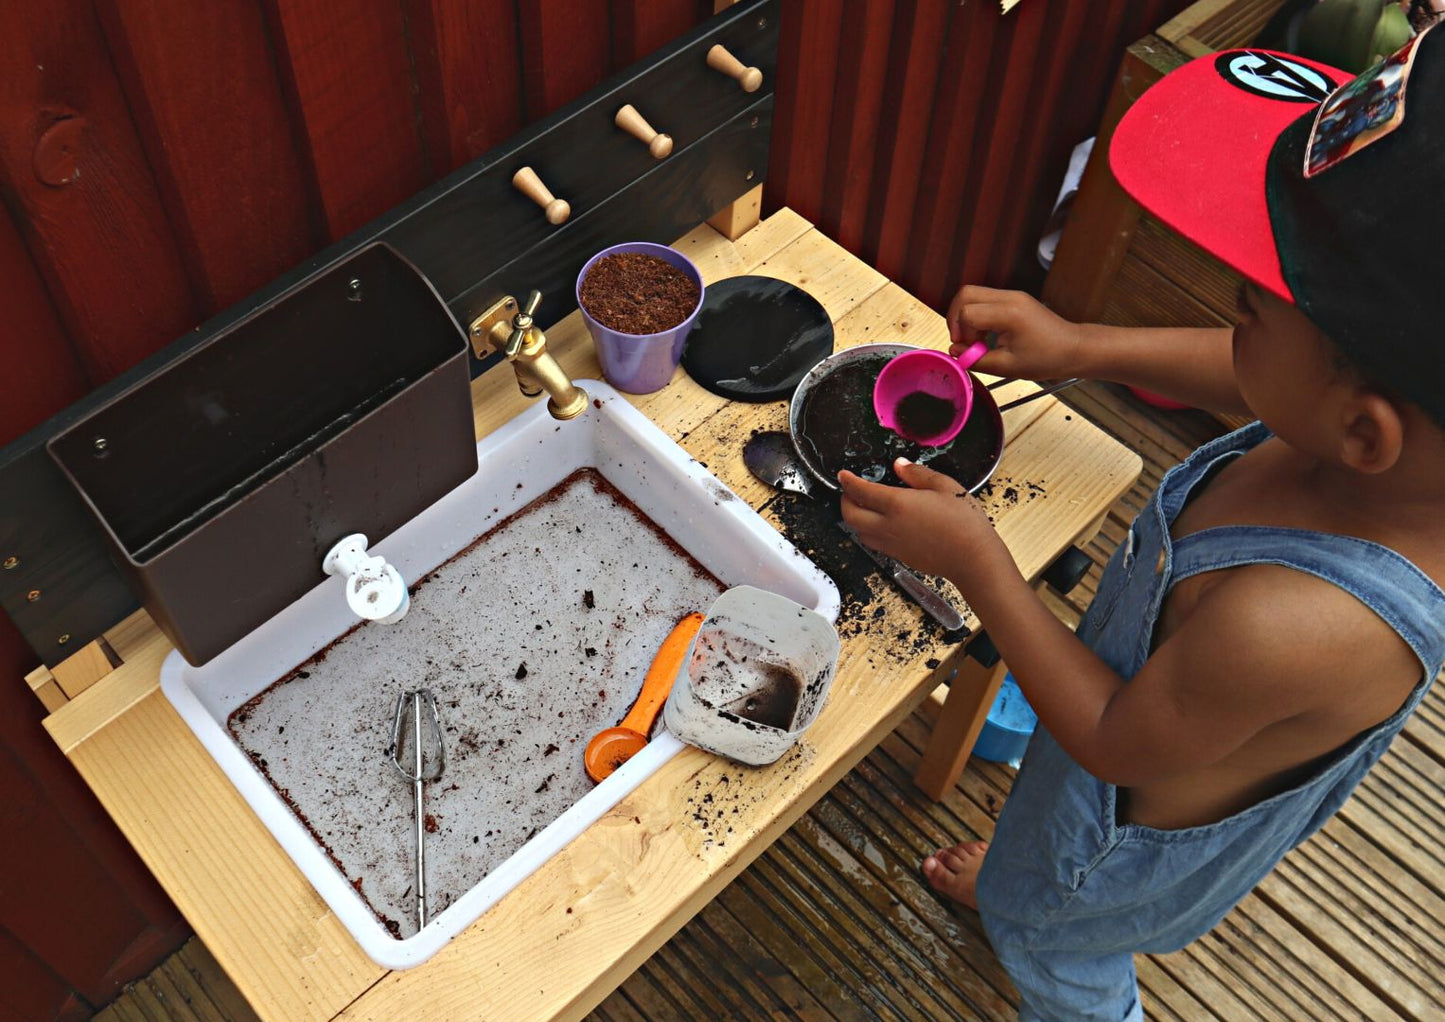 Creative play in a mud kitchen